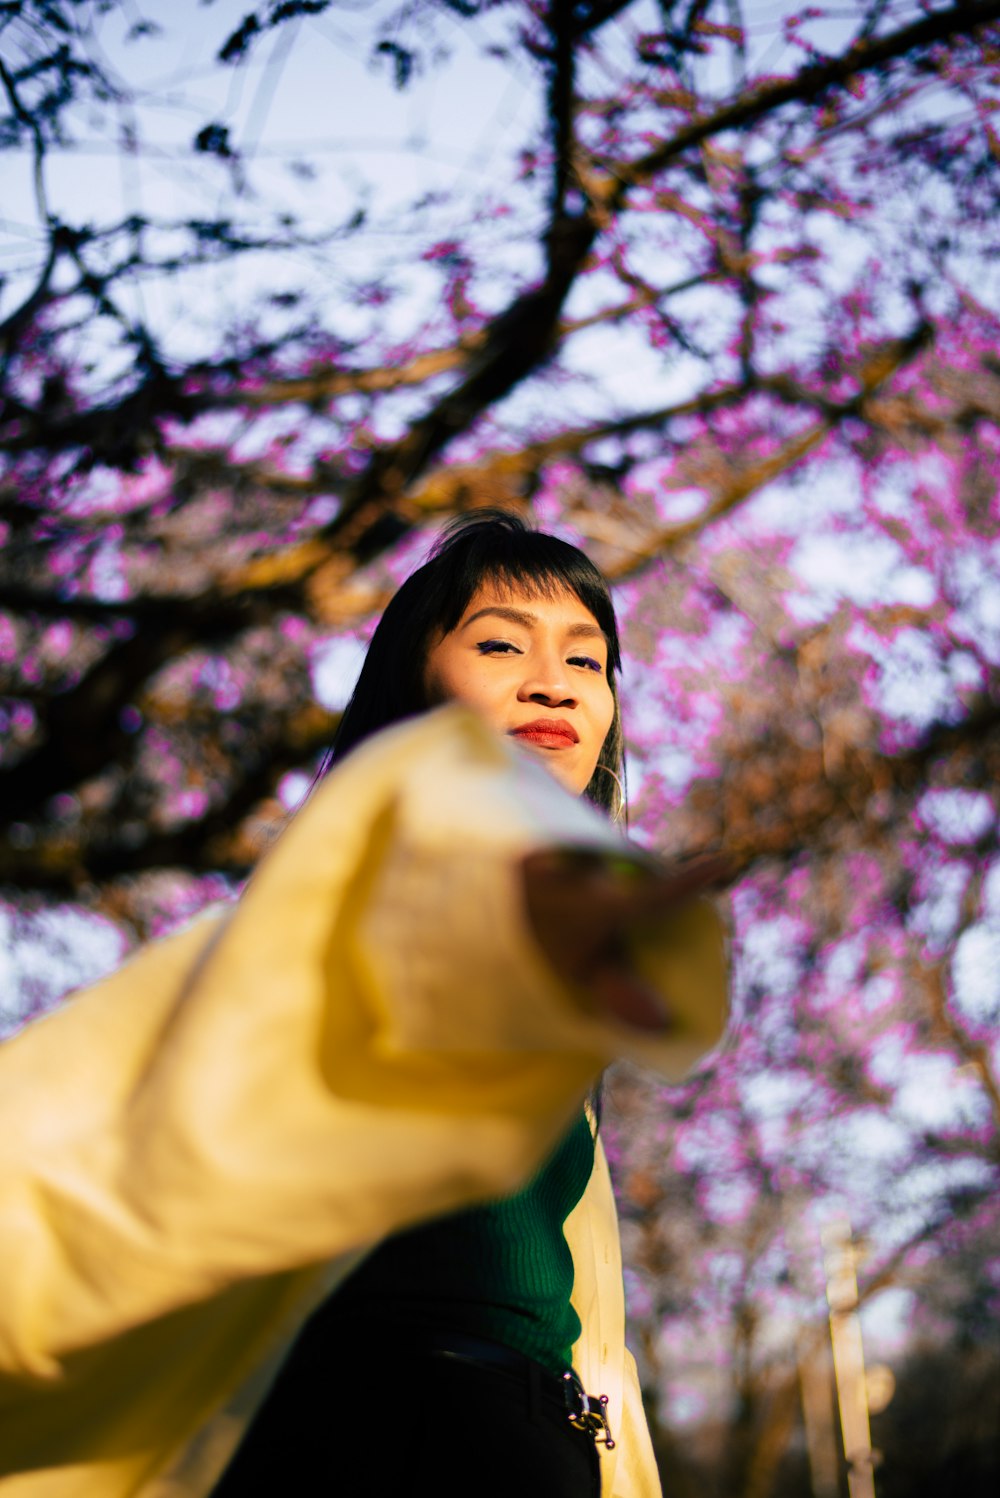 shallow focus photo of woman under the tree